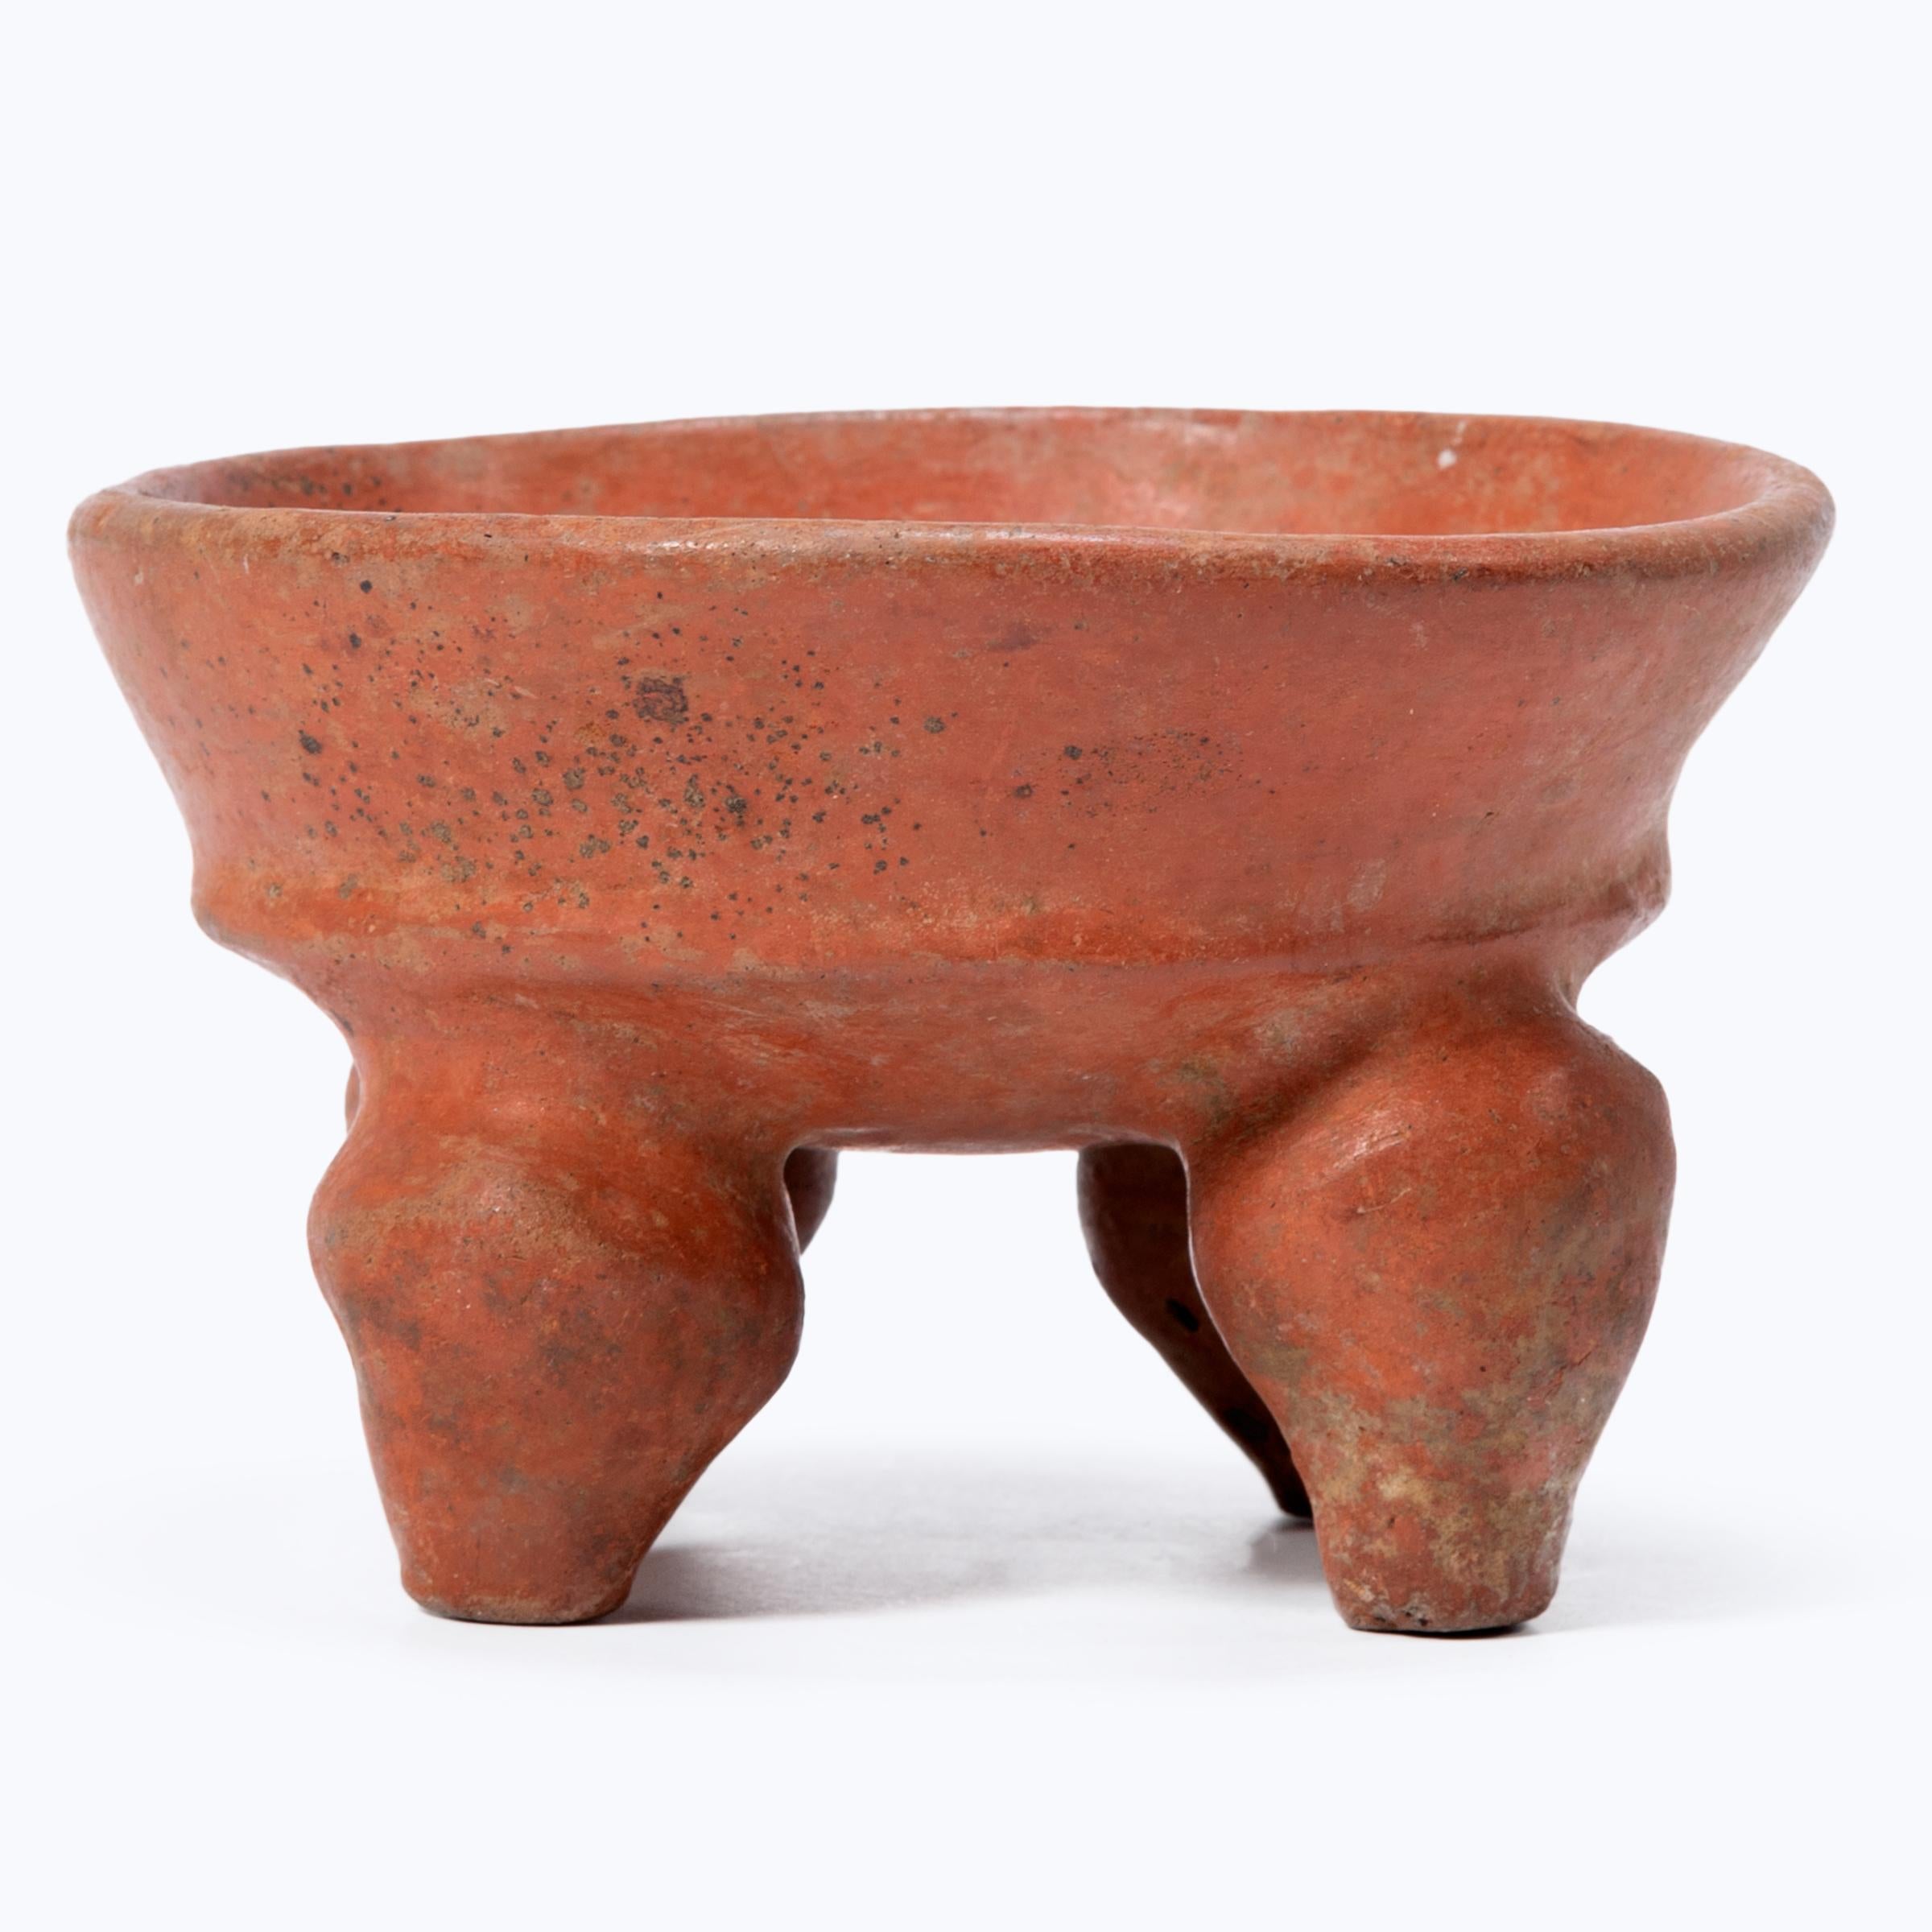 This wide-mouthed bowl raised upon four bulbous feet is formed in the style of mammiform tetrapod serving plates from the Maya lowlands of Mexico and Guatemala. Used as a presentation vessel, the petite bowl is coated in a glossy red-orange slip,